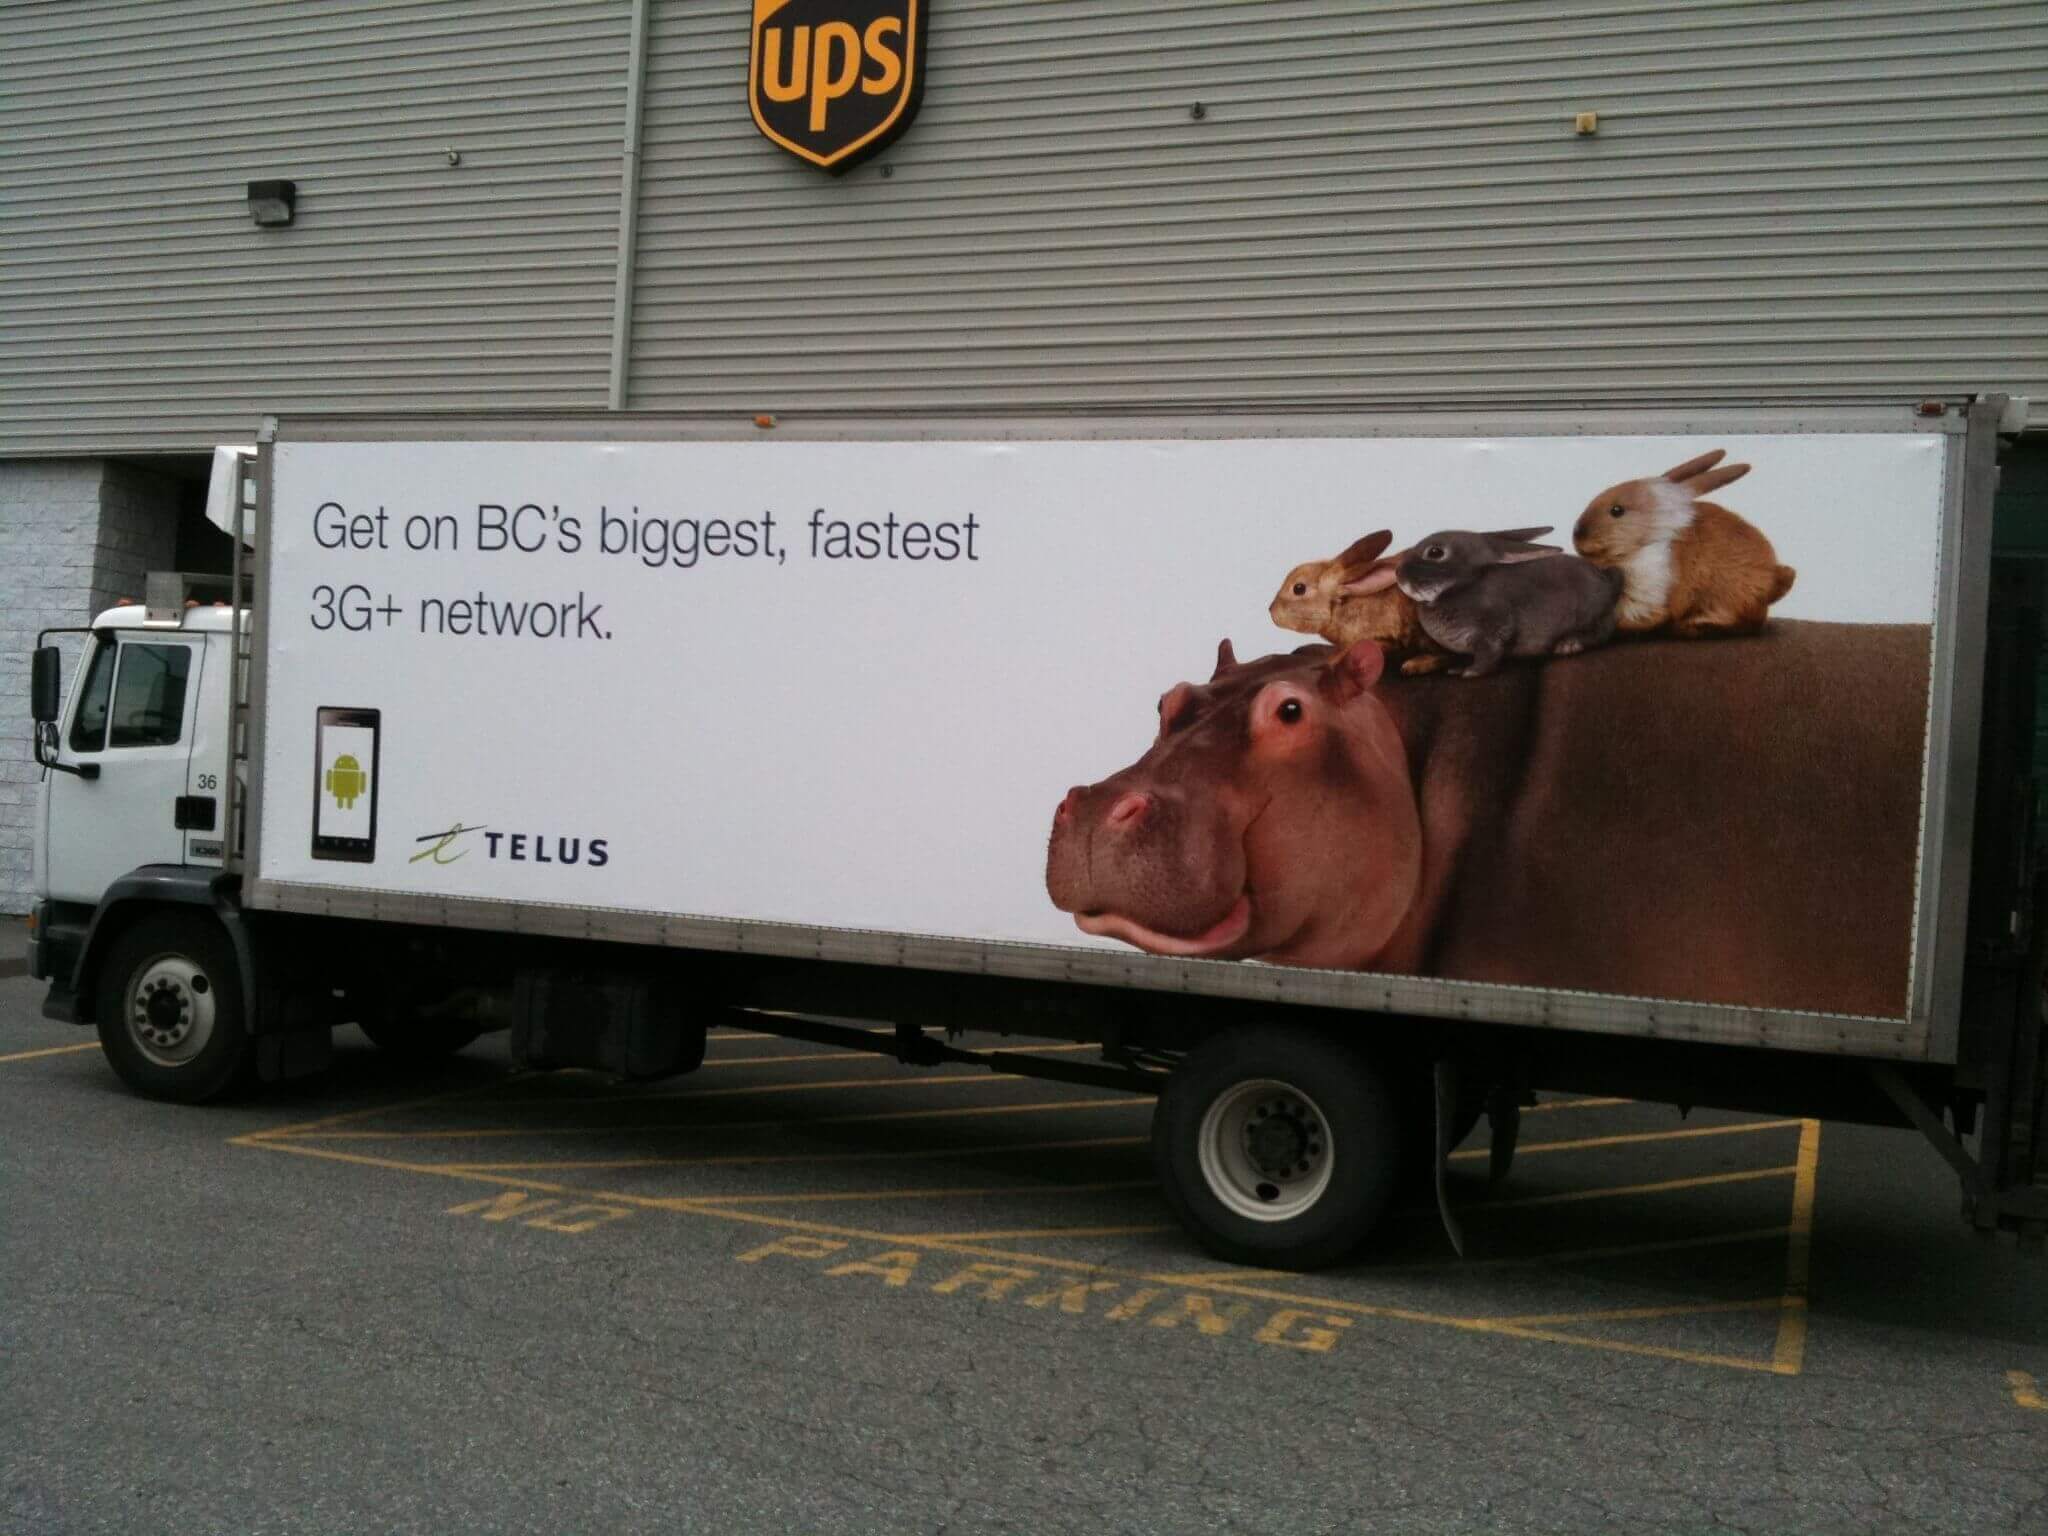 Truck advertisements typically save businesses more money due to their one-time package